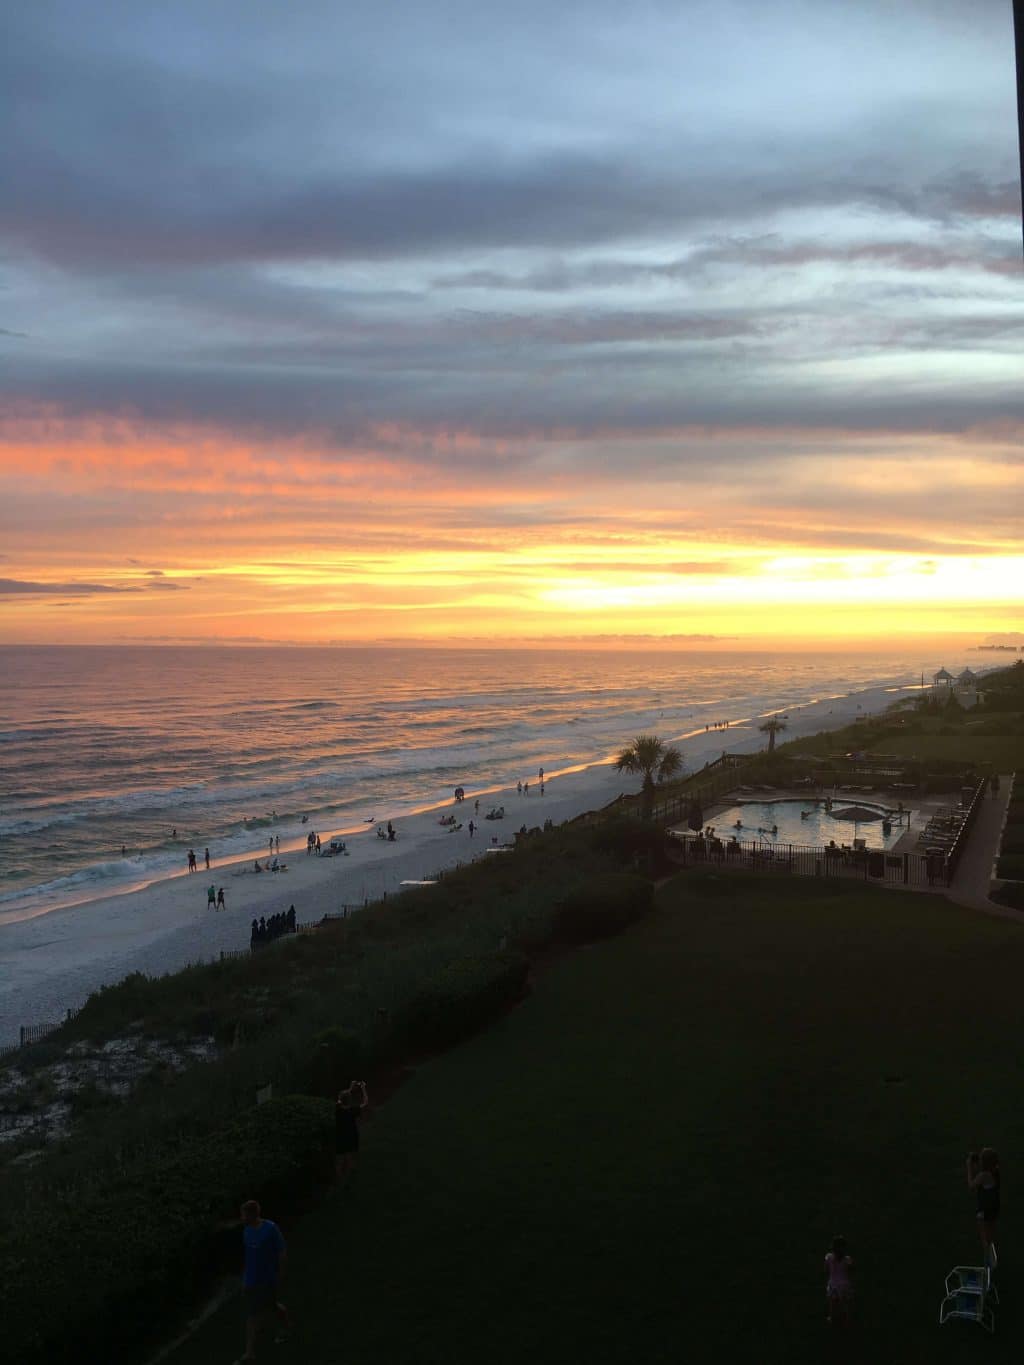 30A best place to stay, family vacation favorites, stilettos and diapers, santa rosa beach, florida